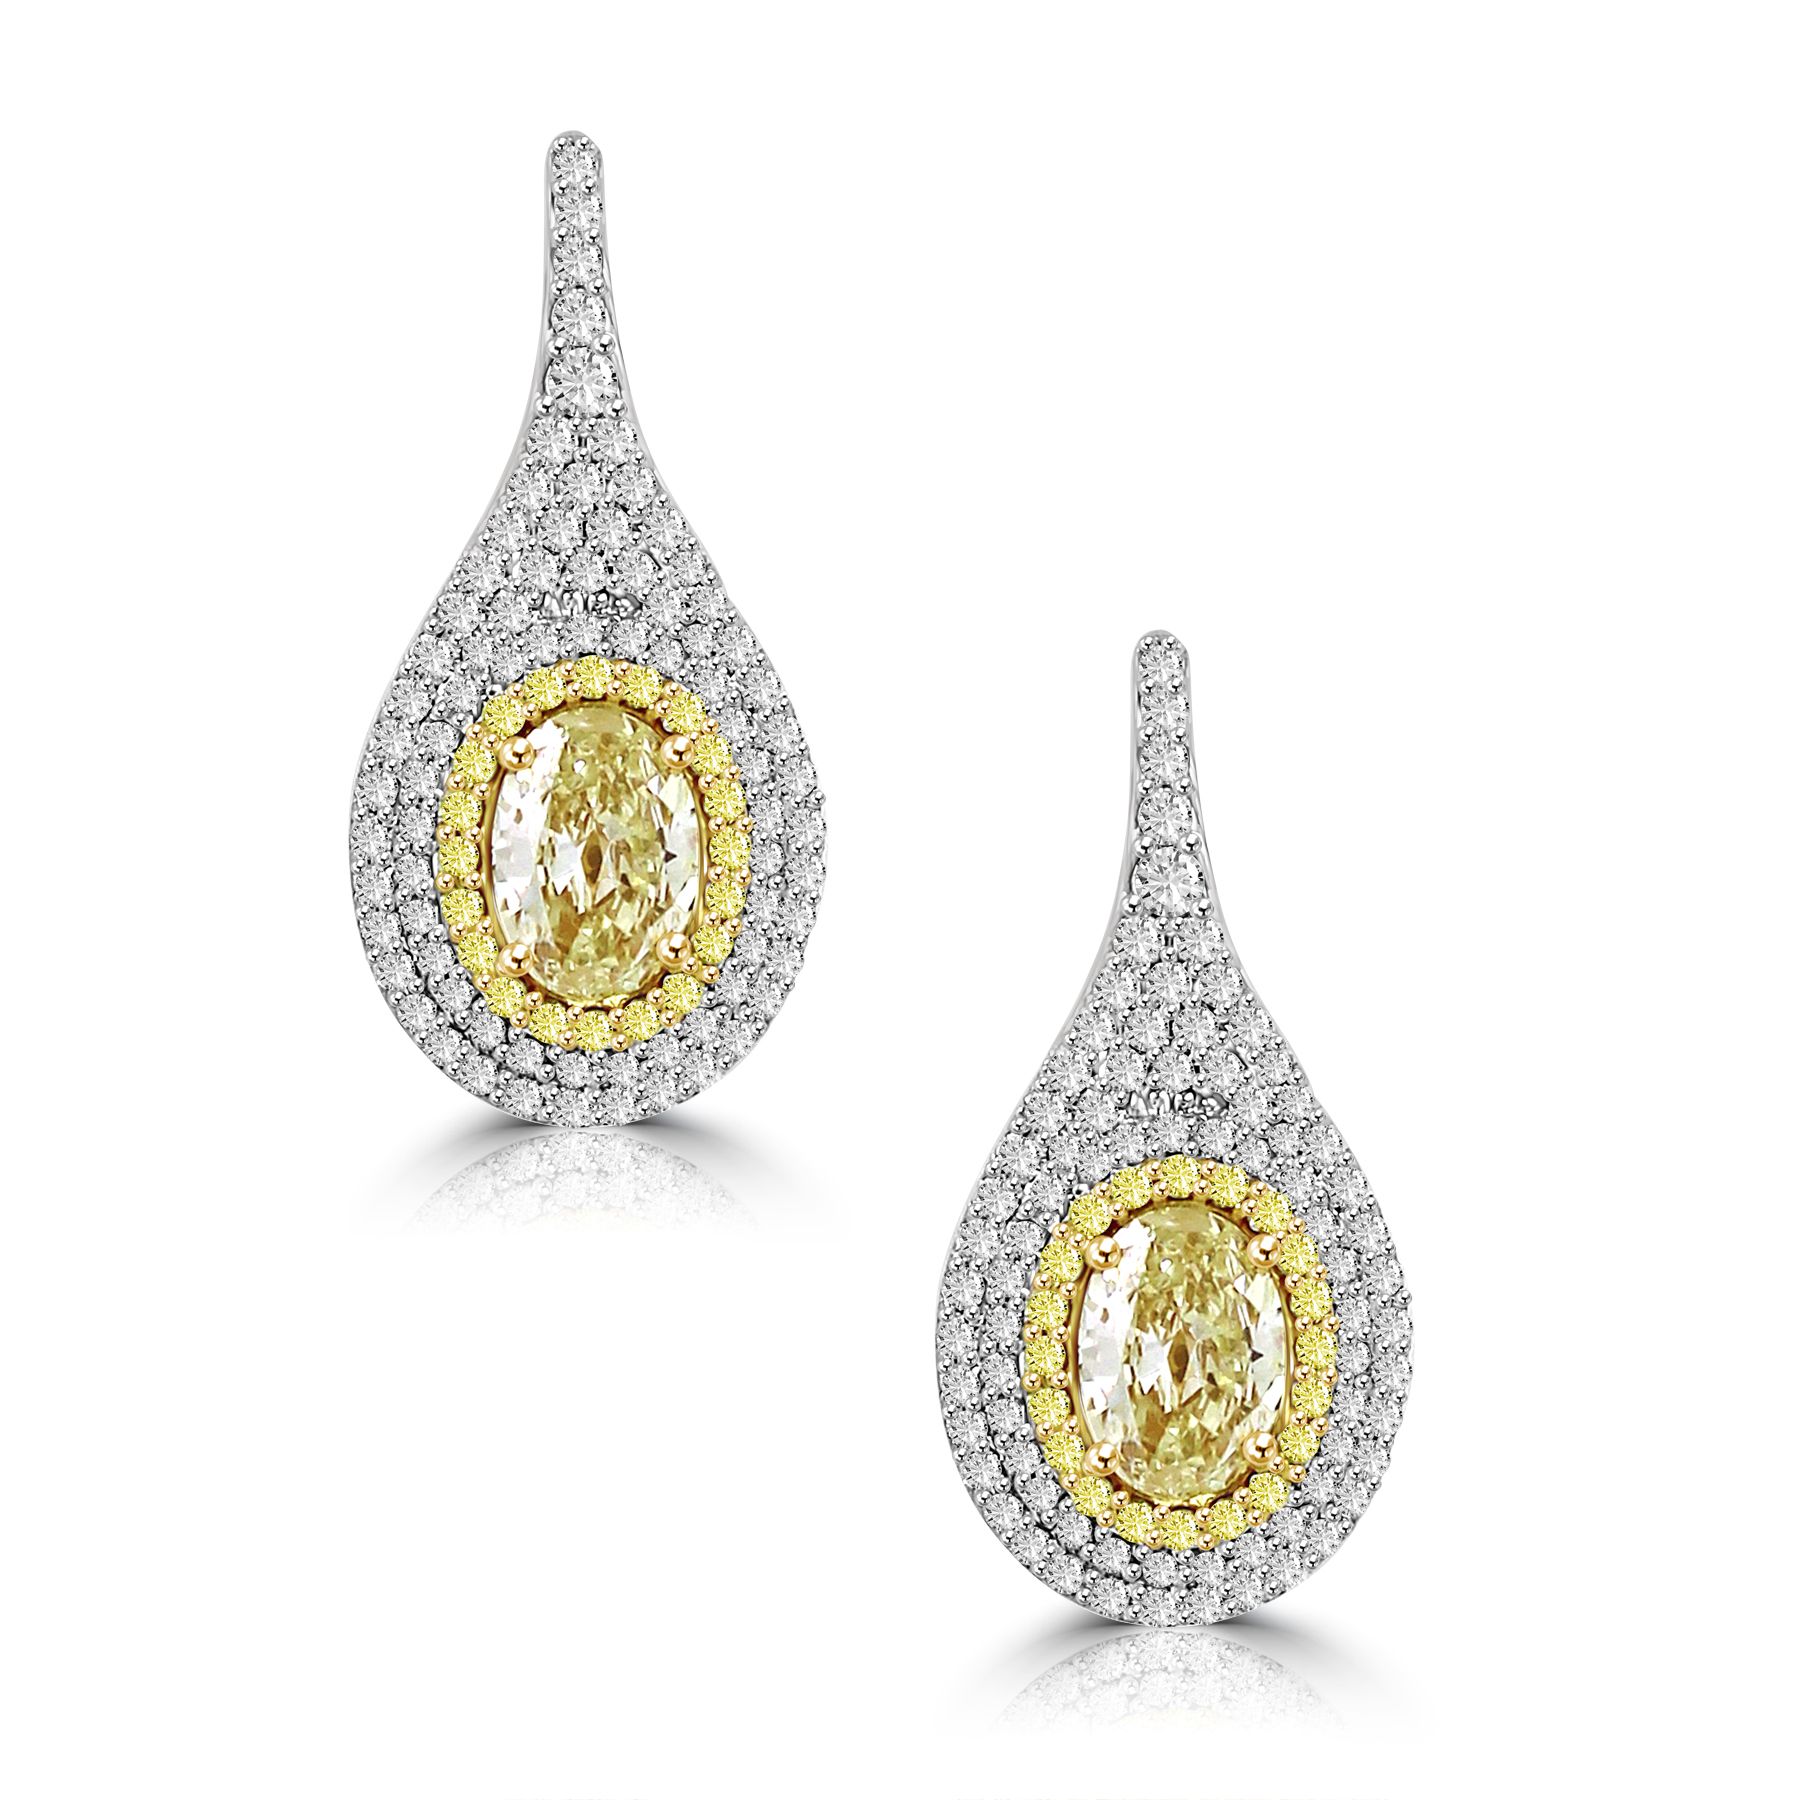 Natural Fancy Color Diamond Earrings with Oval Yellow Diamond in the Center Image